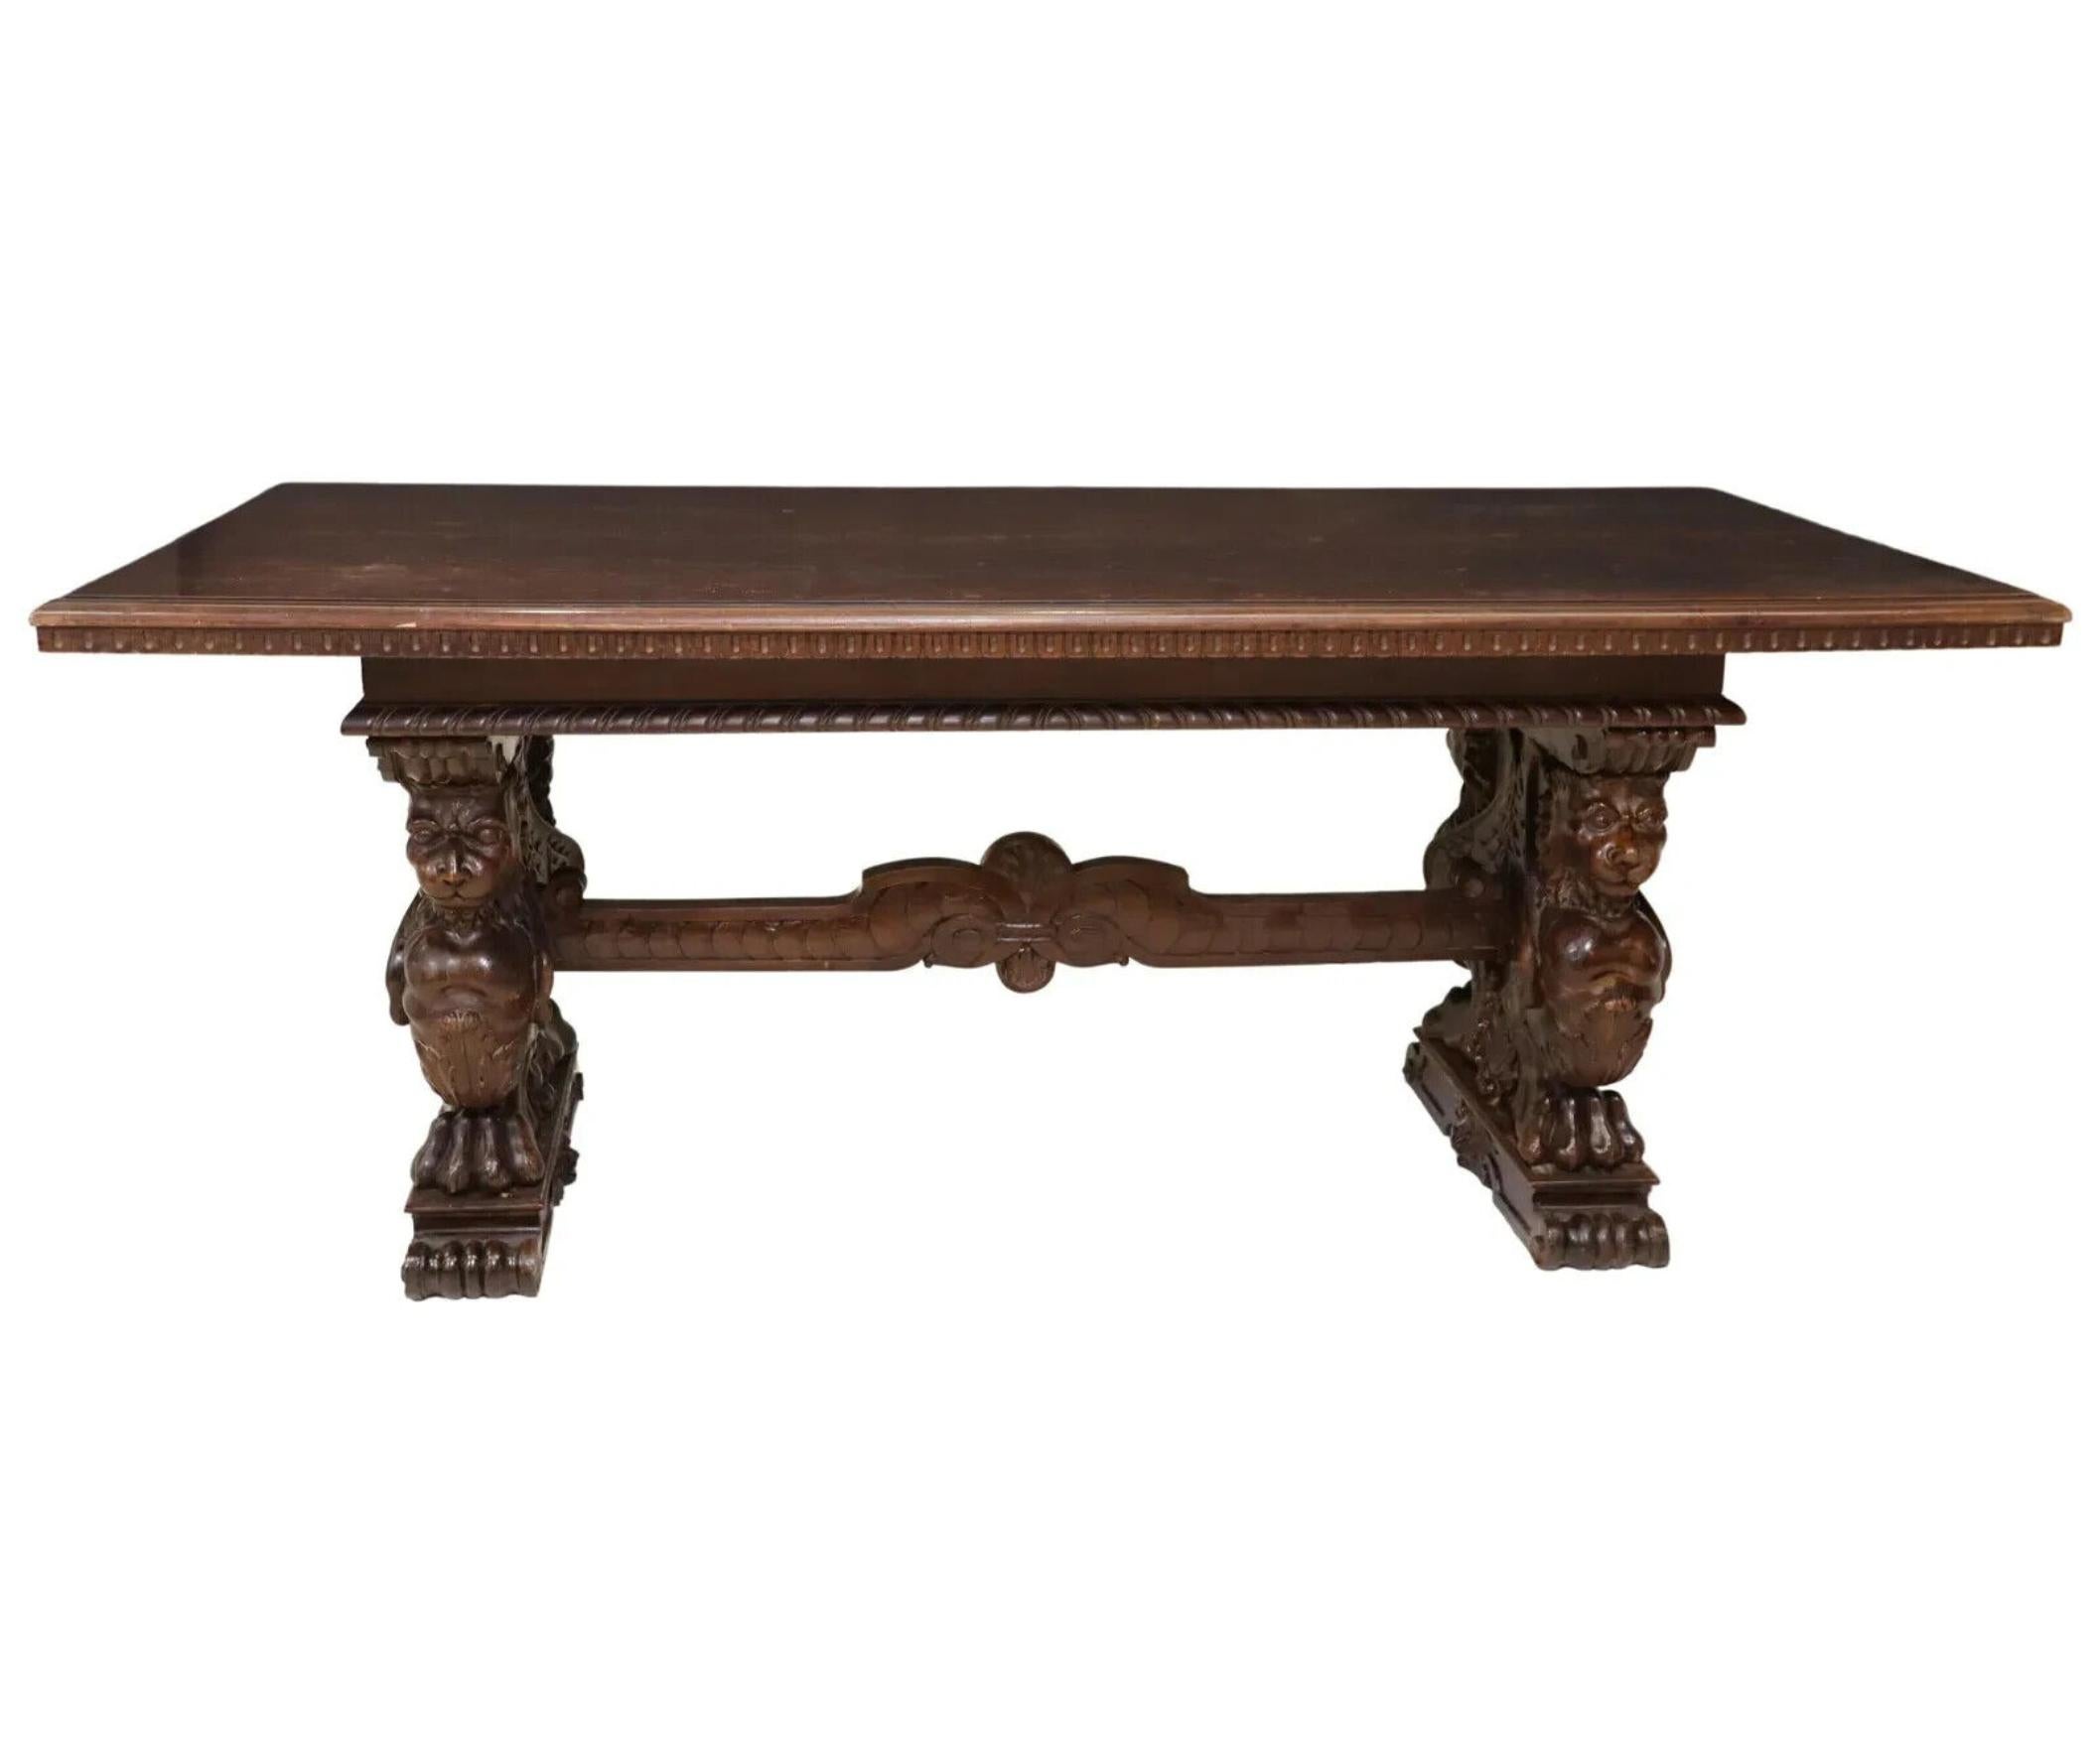 Gorgeous Early 1900's Antique Fine Italian Renaissance Revival, Walnut, Carved Table!!

Antique Table, Fine Italian Renaissance Revival, Walnut, Carved, Trestle, Early 1900's, 20th Century!

Italian Renaissance Revival carved walnut table, early